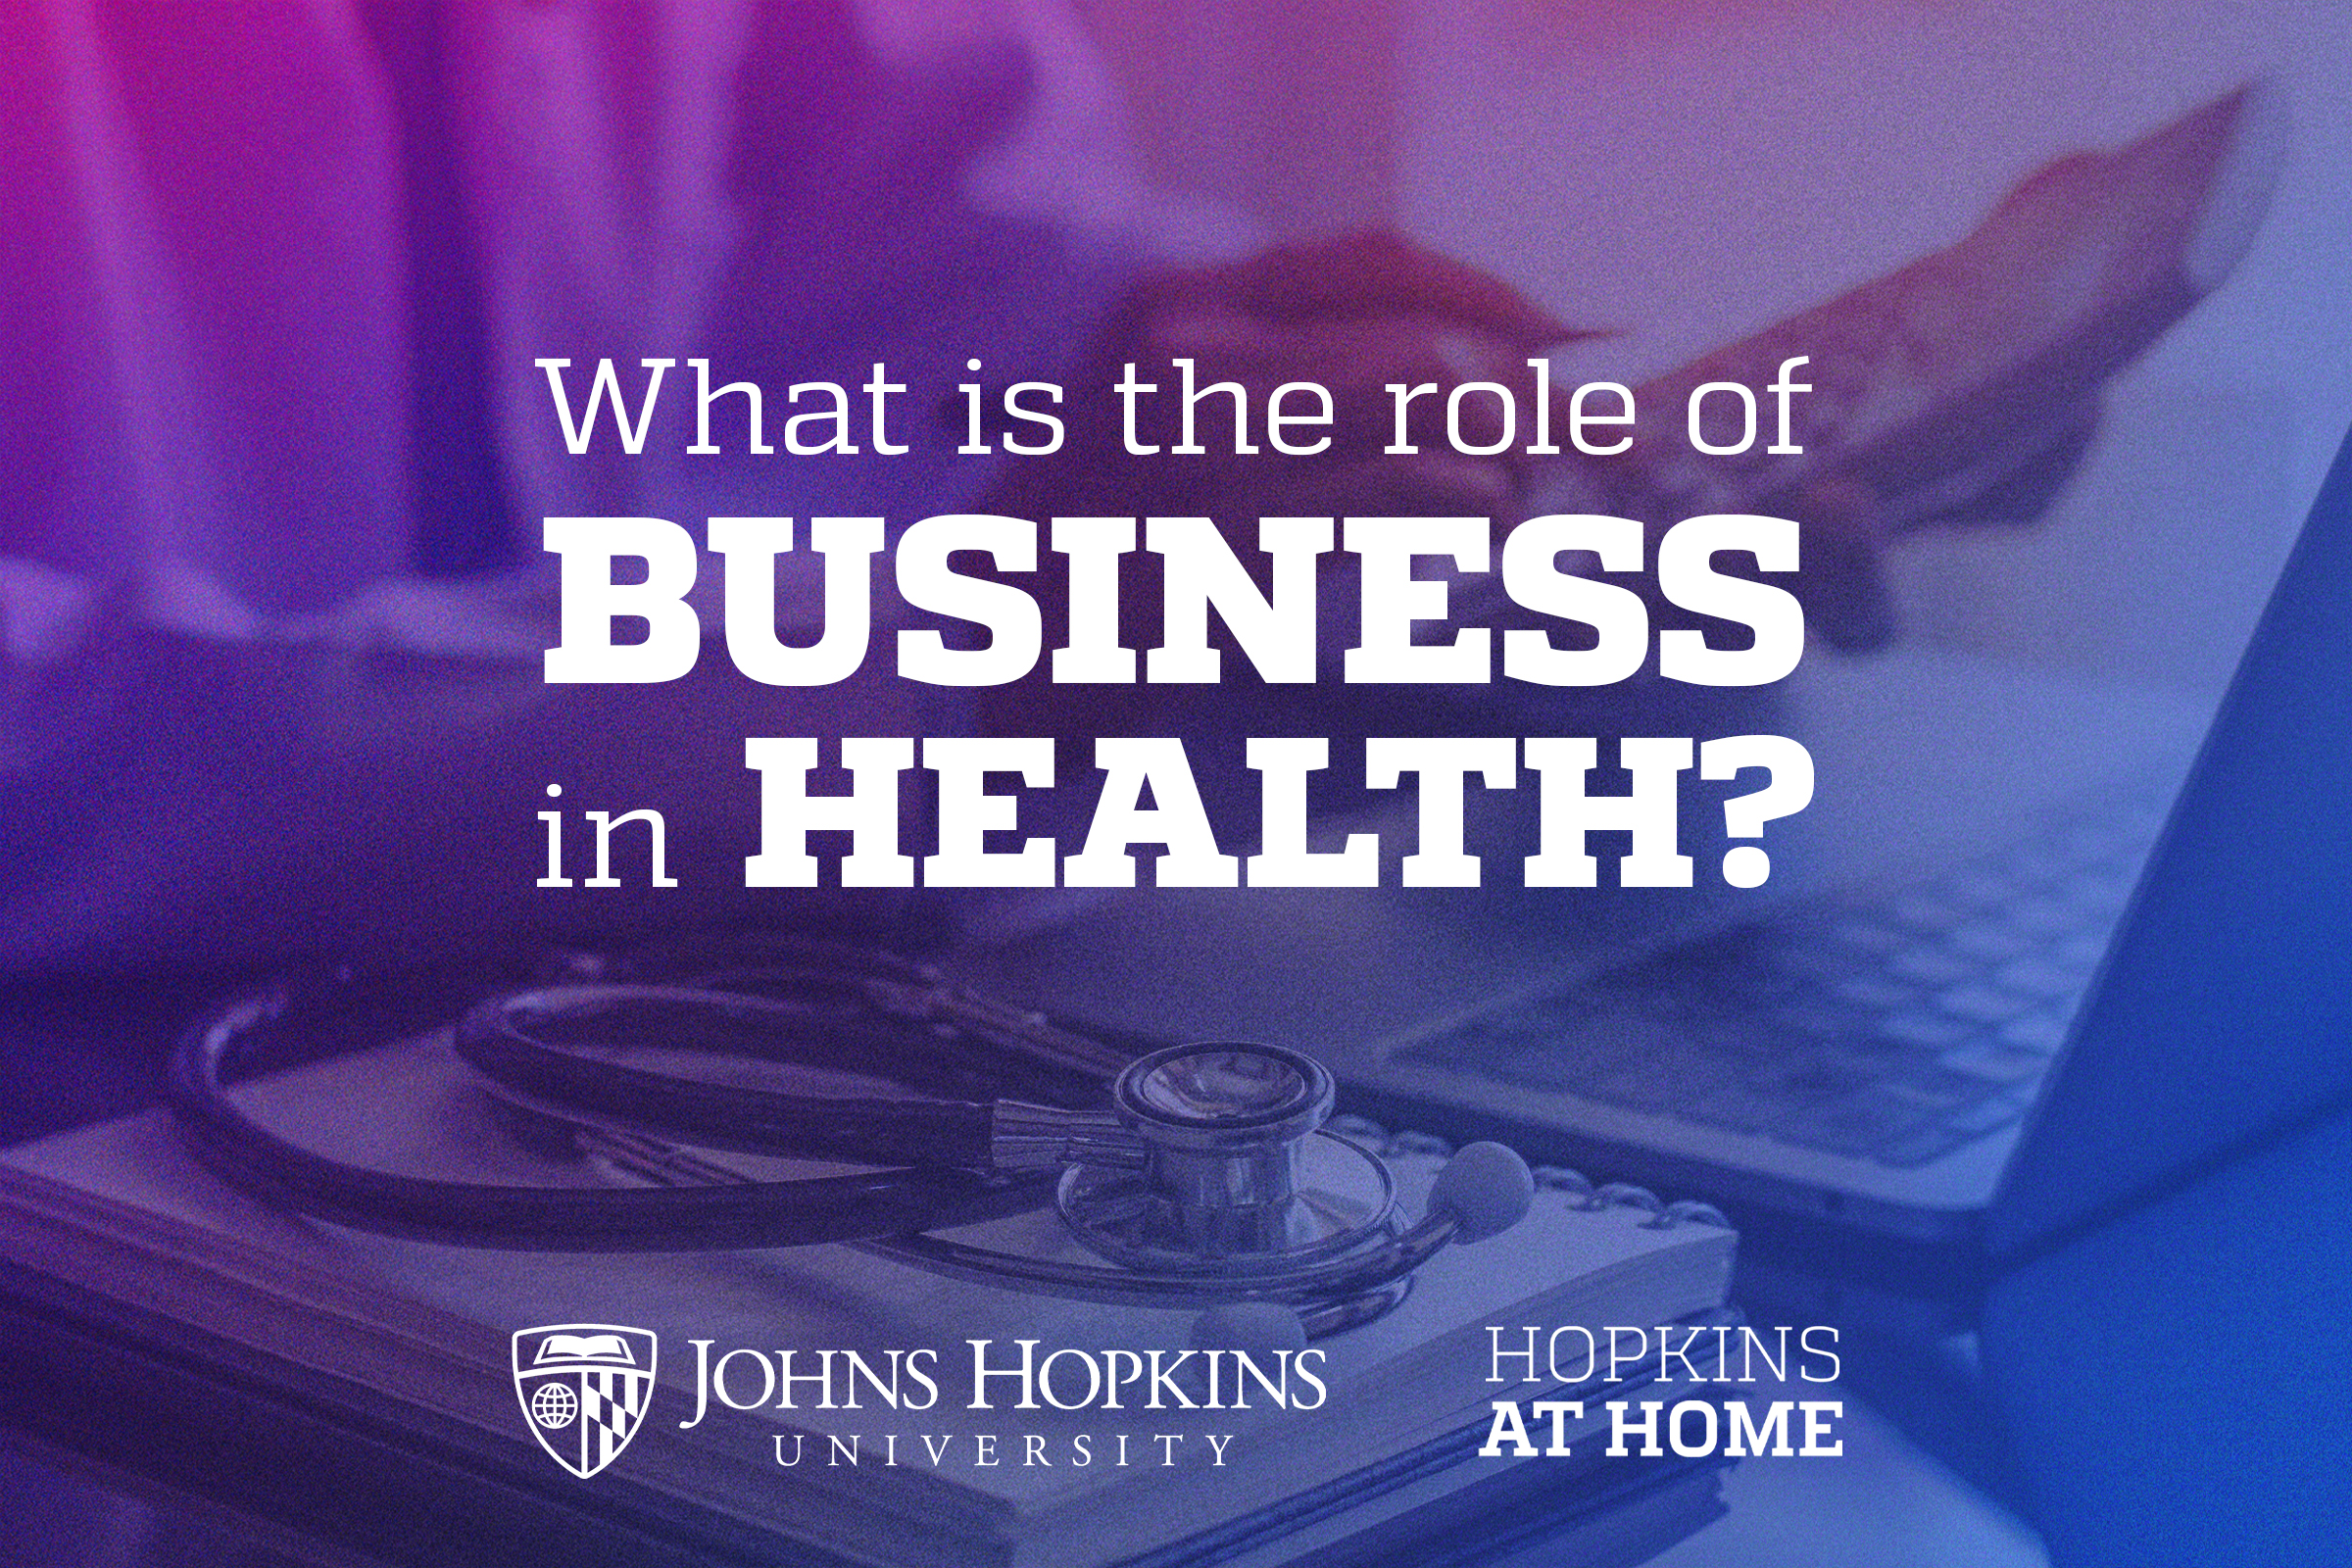 Hopkins at Home - Business of Health